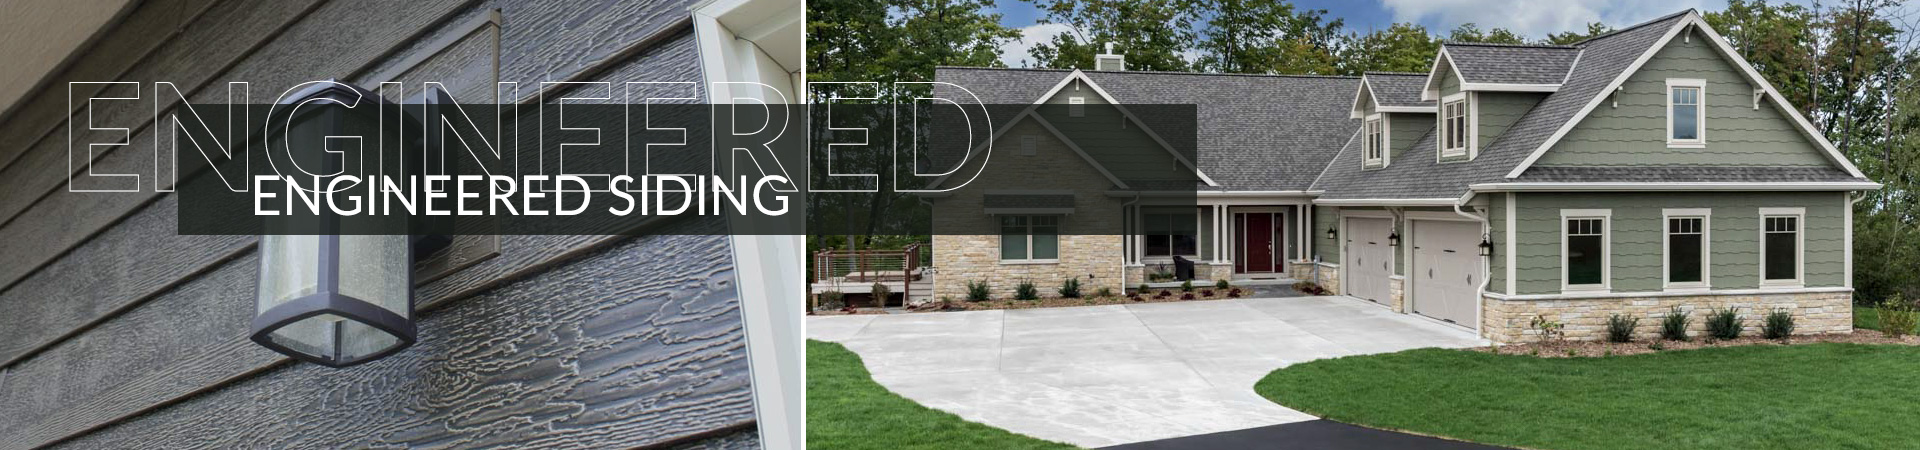 Engineered Siding styles and options at Turkstra